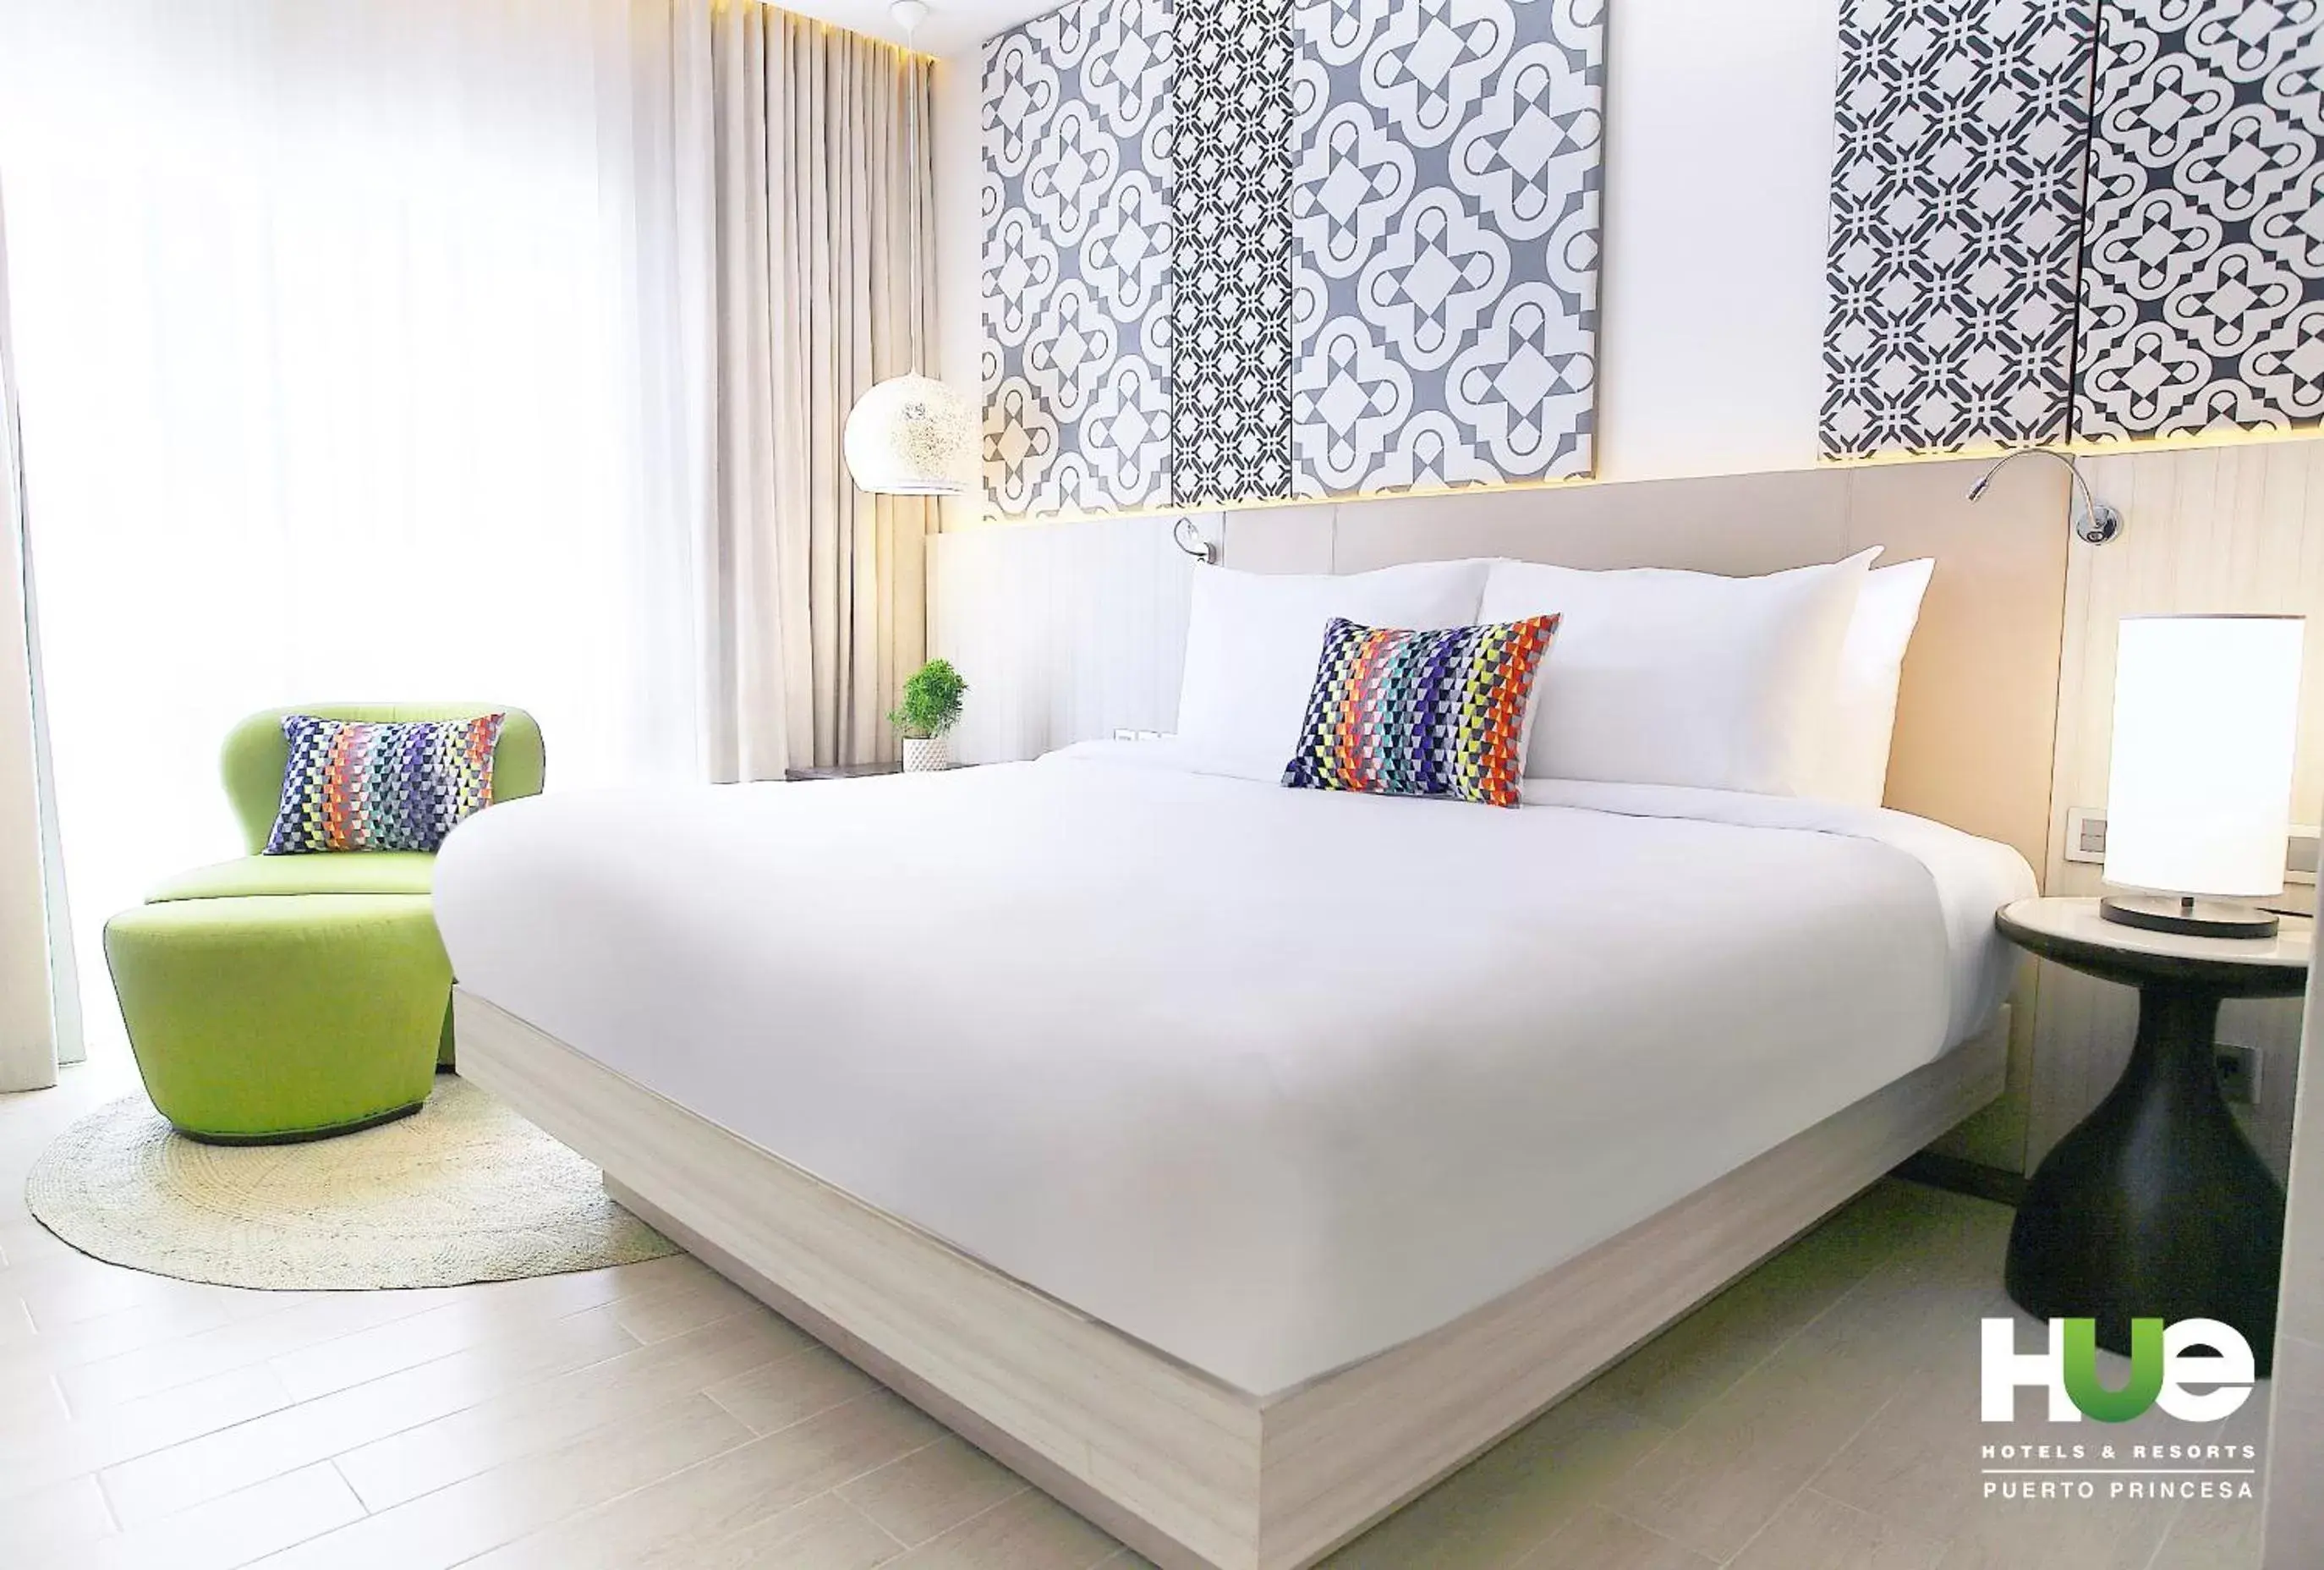 Bed in Hue Hotels and Resorts Puerto Princesa Managed by HII